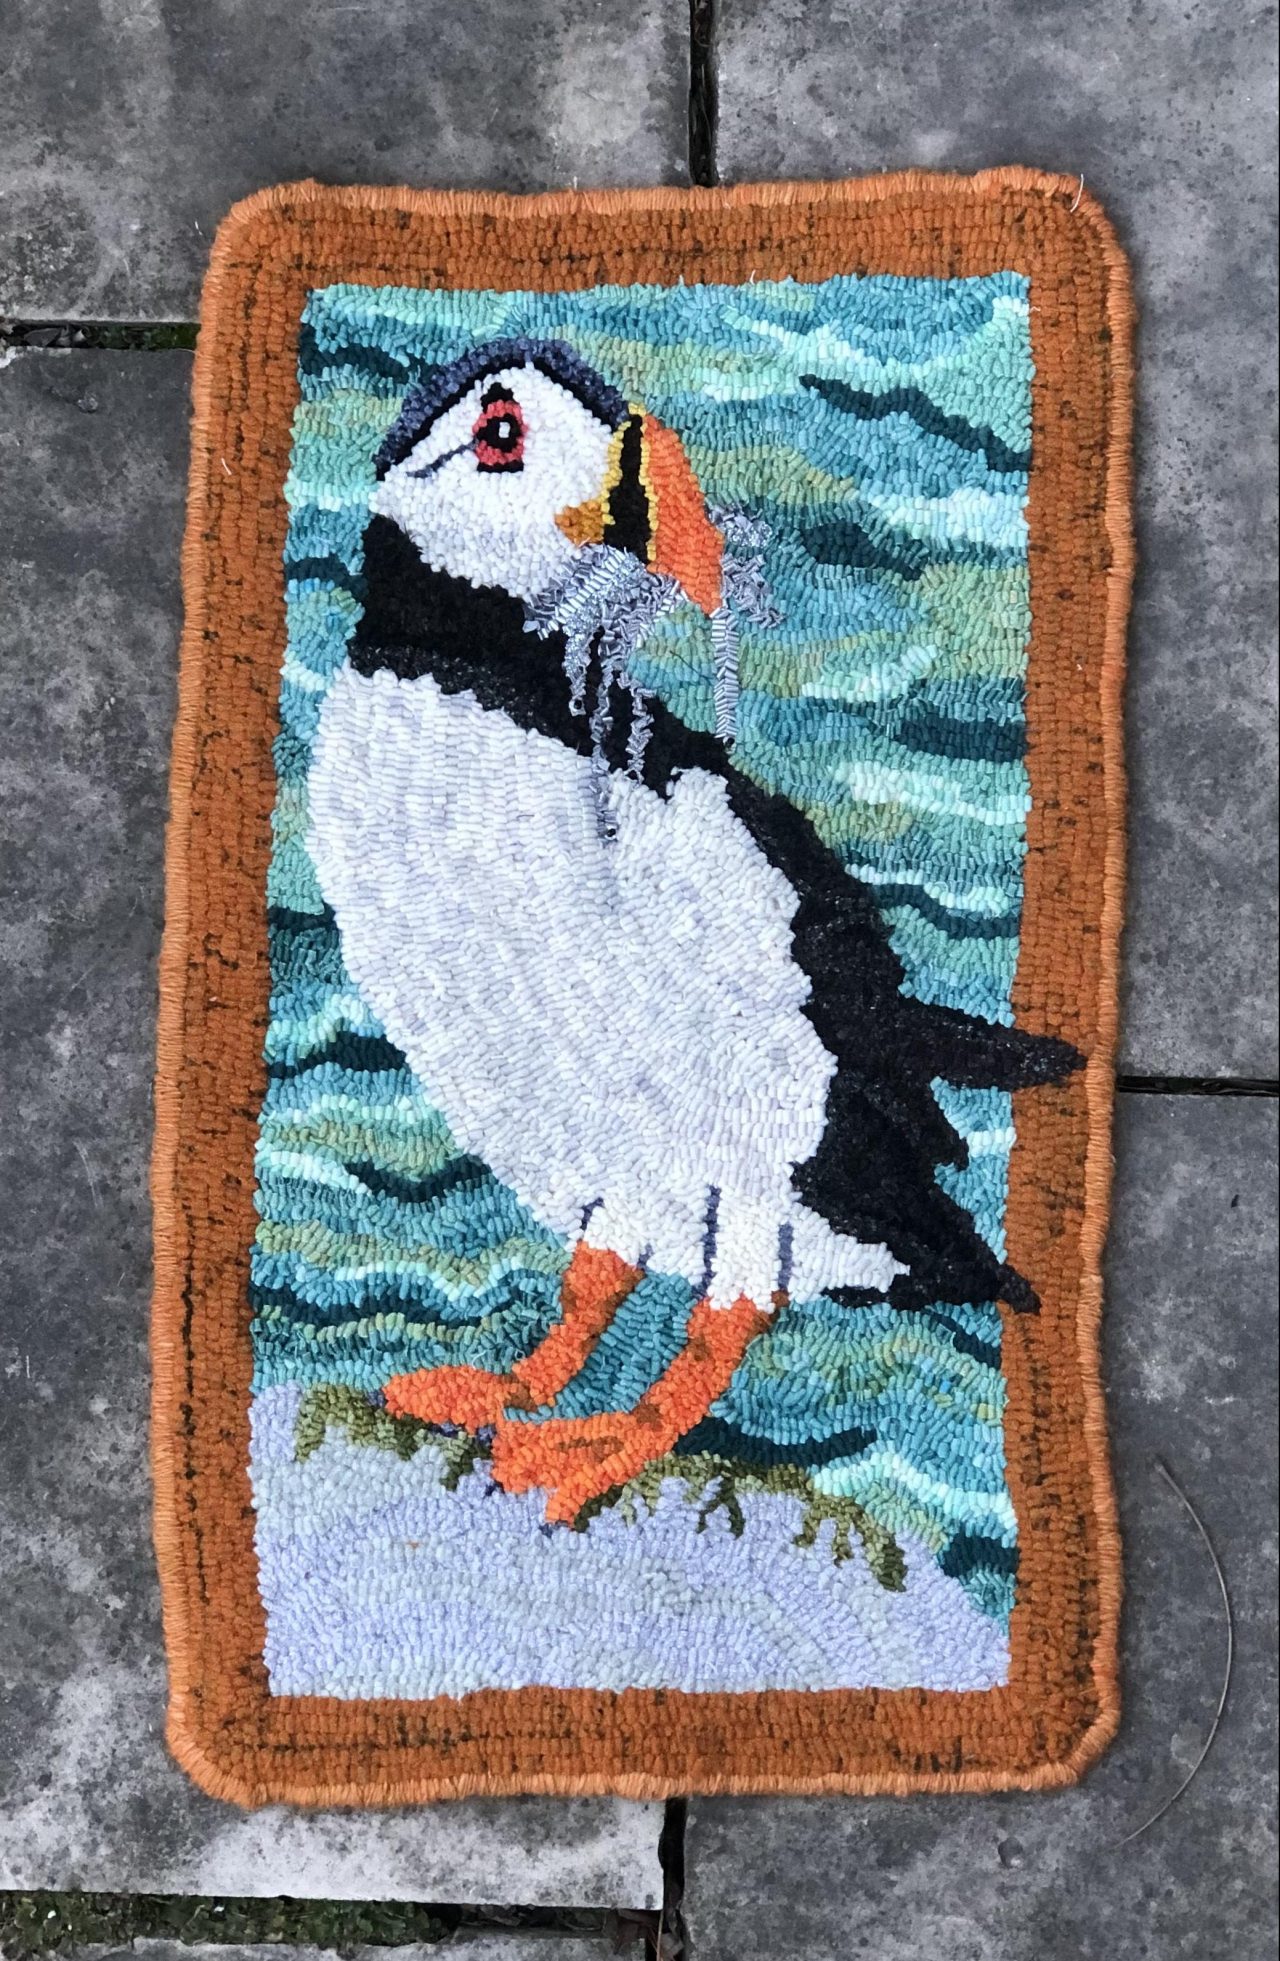 hooked rug art of a puffin with fish in its mouth by Yvonne Iten-Scott